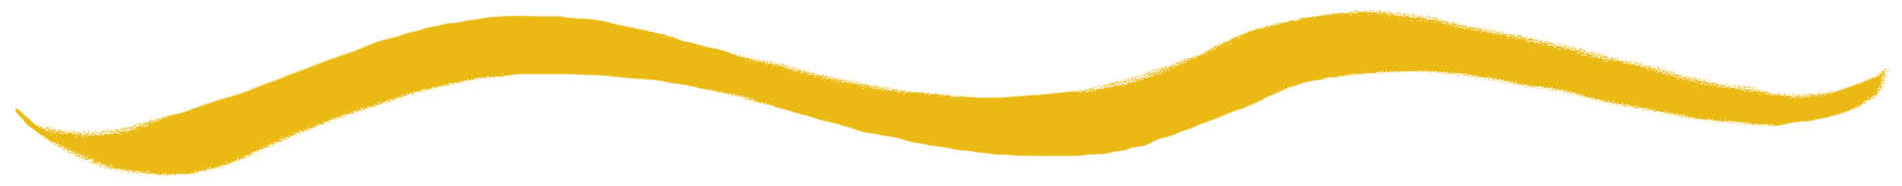 an illustration of a yellow walking path